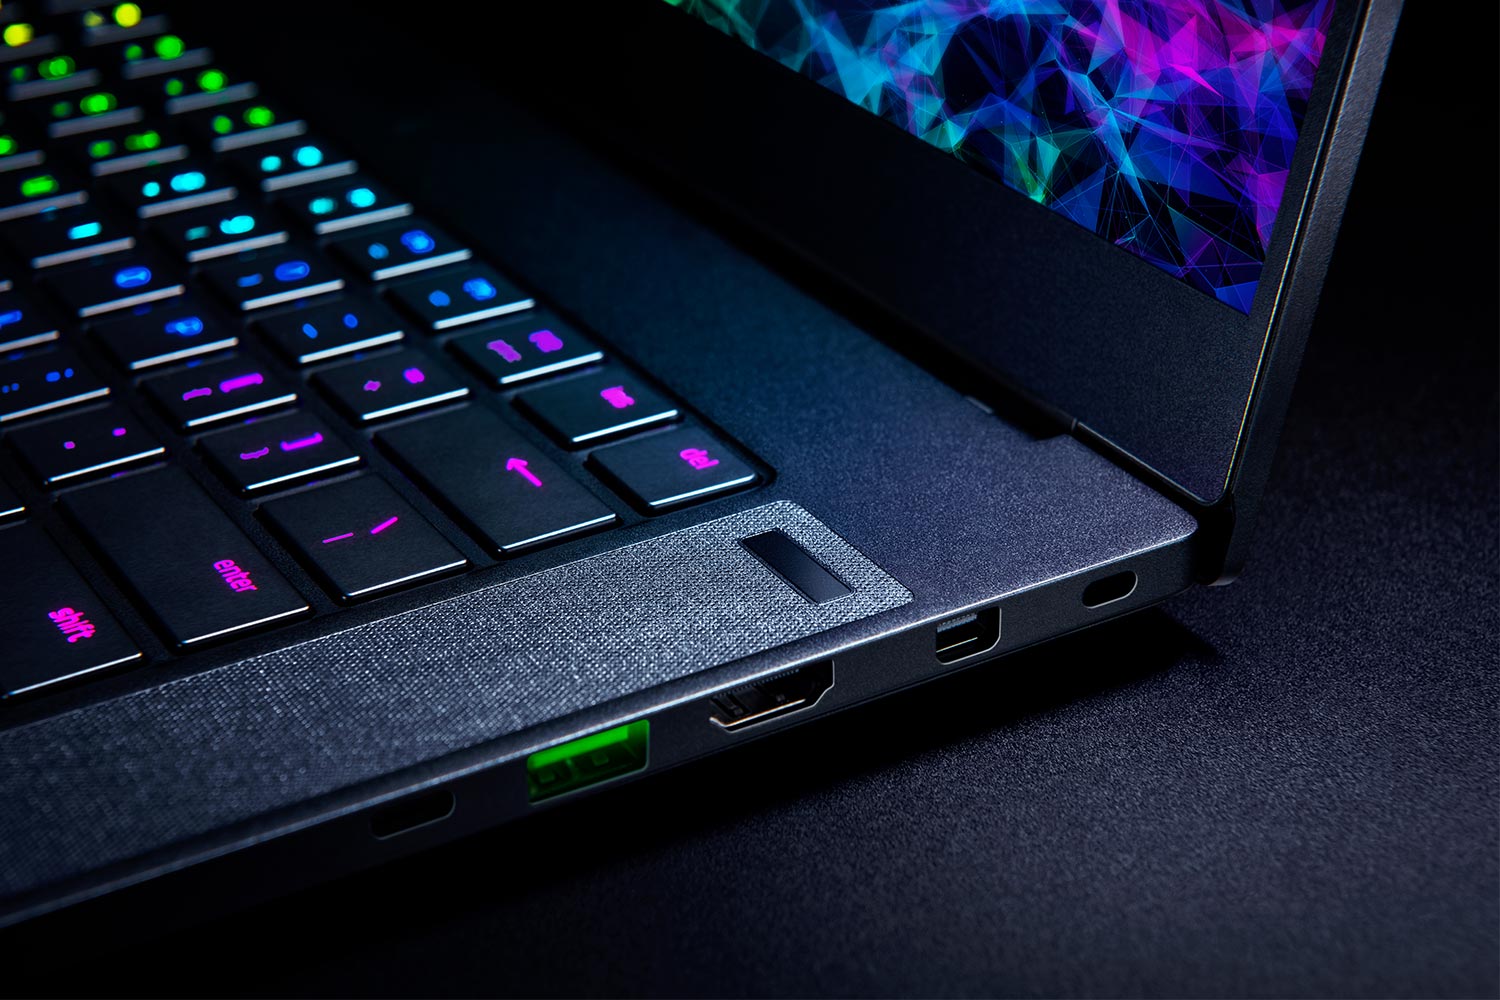 MidRange Gaming Laptops that Can Handle Competitive Online Gaming